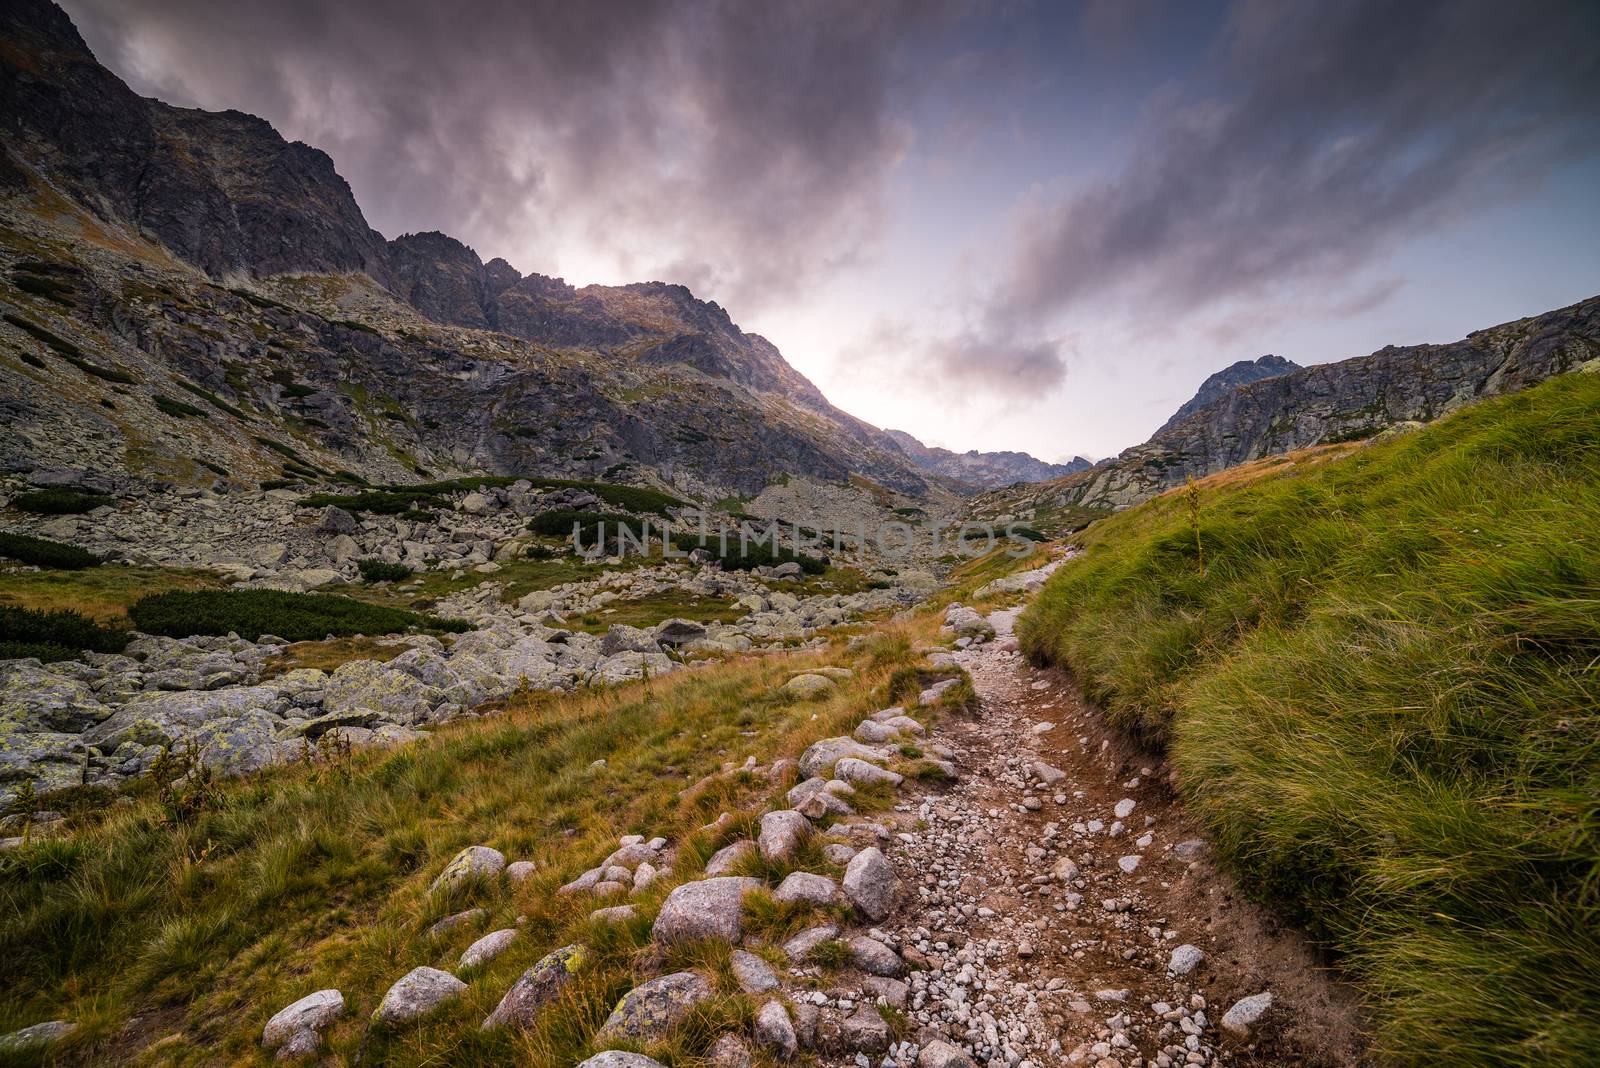 Hiking Trail in the Mountains in the Evening. Mlynicka Valley, High Tatra, Slovakia.